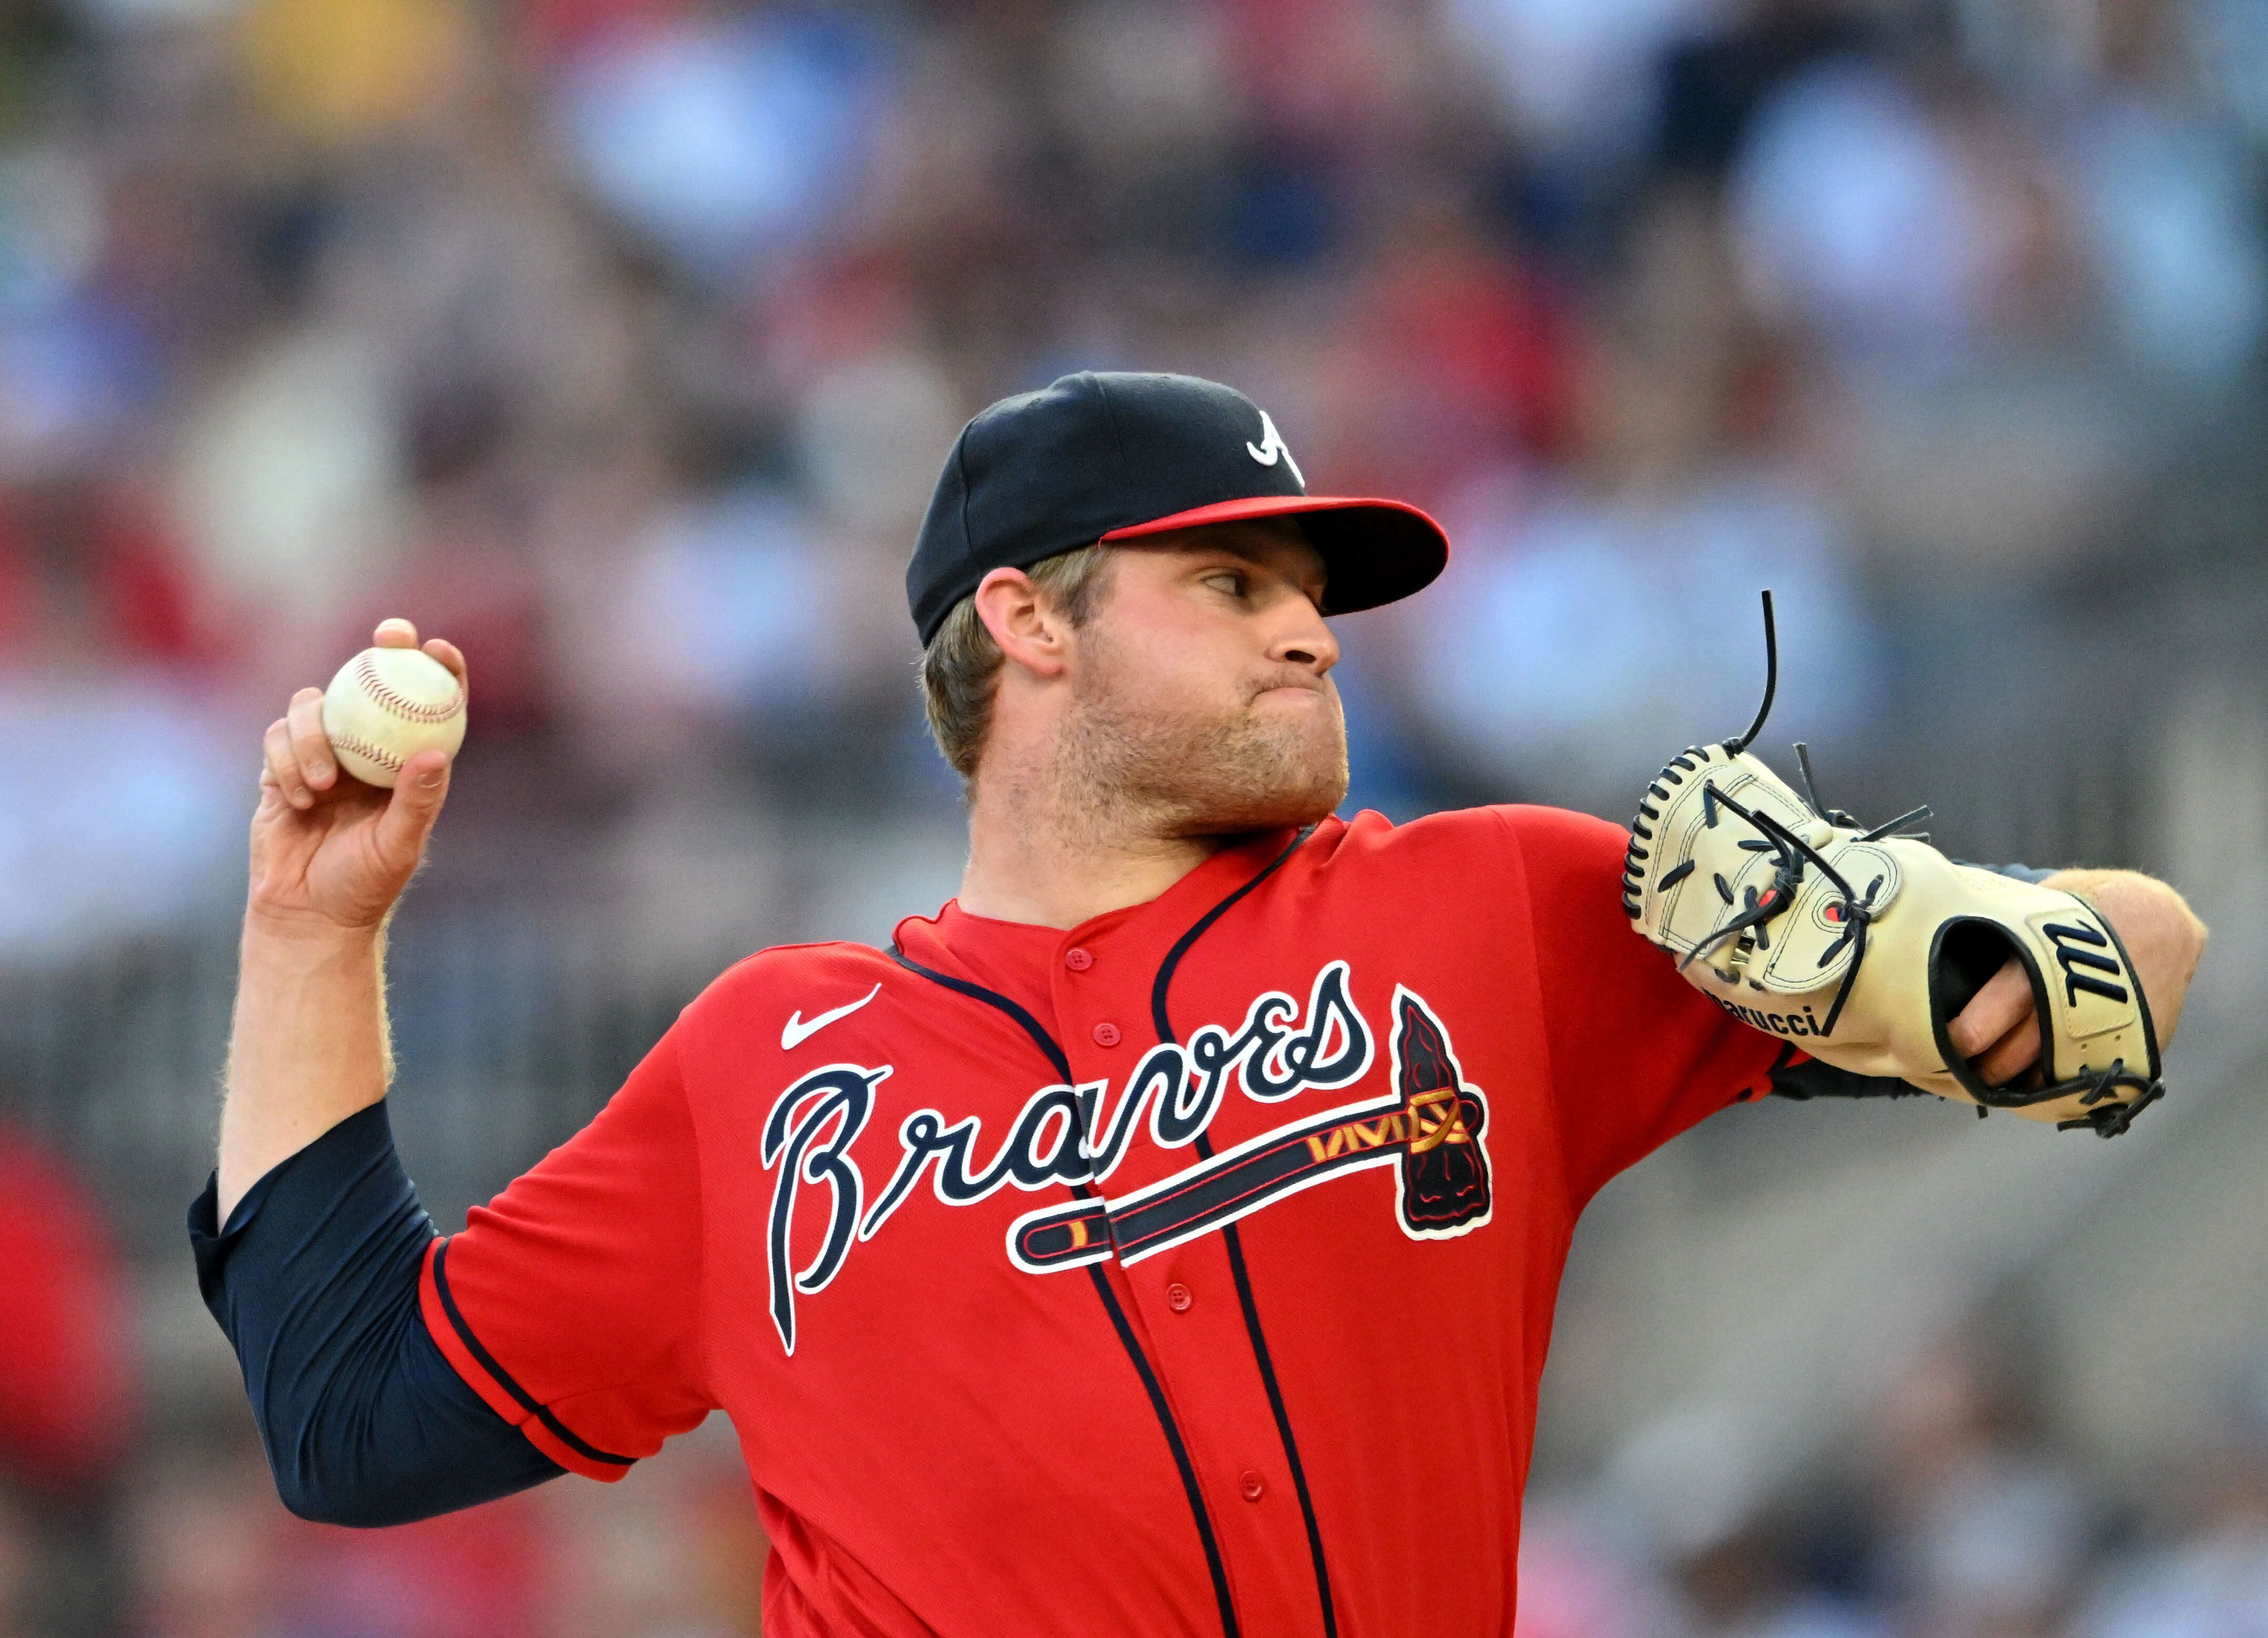 Bryce Elder loses second straight start as Braves fall to Pirates